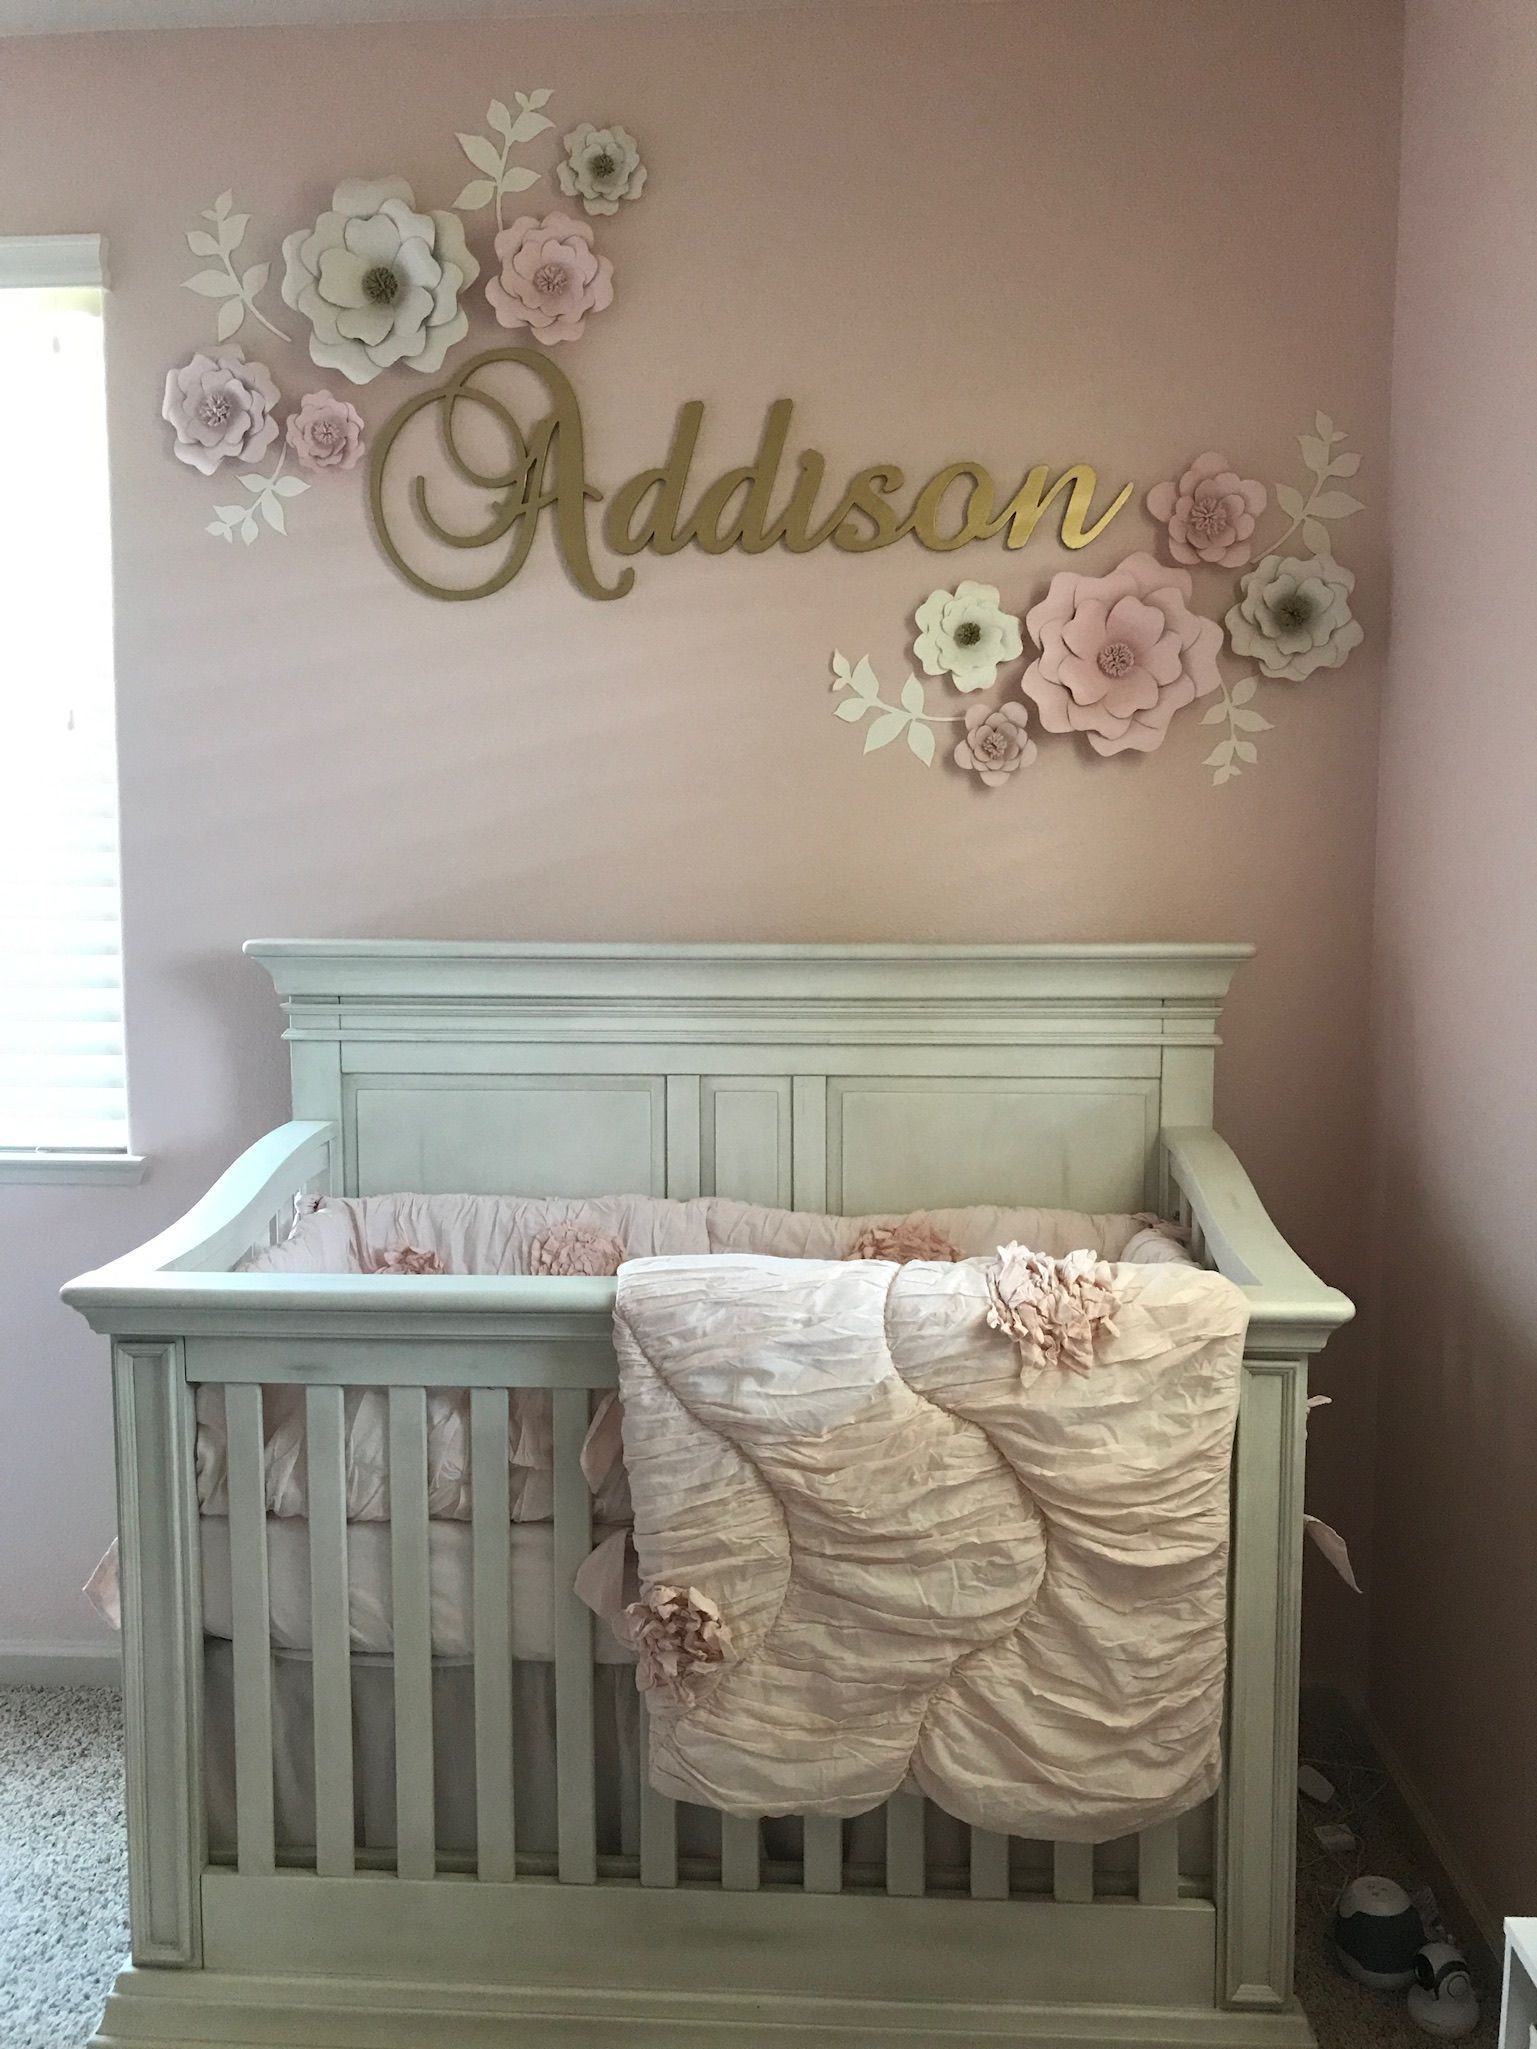 Baby Name Decoration Ideas
 Bedroom Captivating Nursery Themes For Girls With Cute